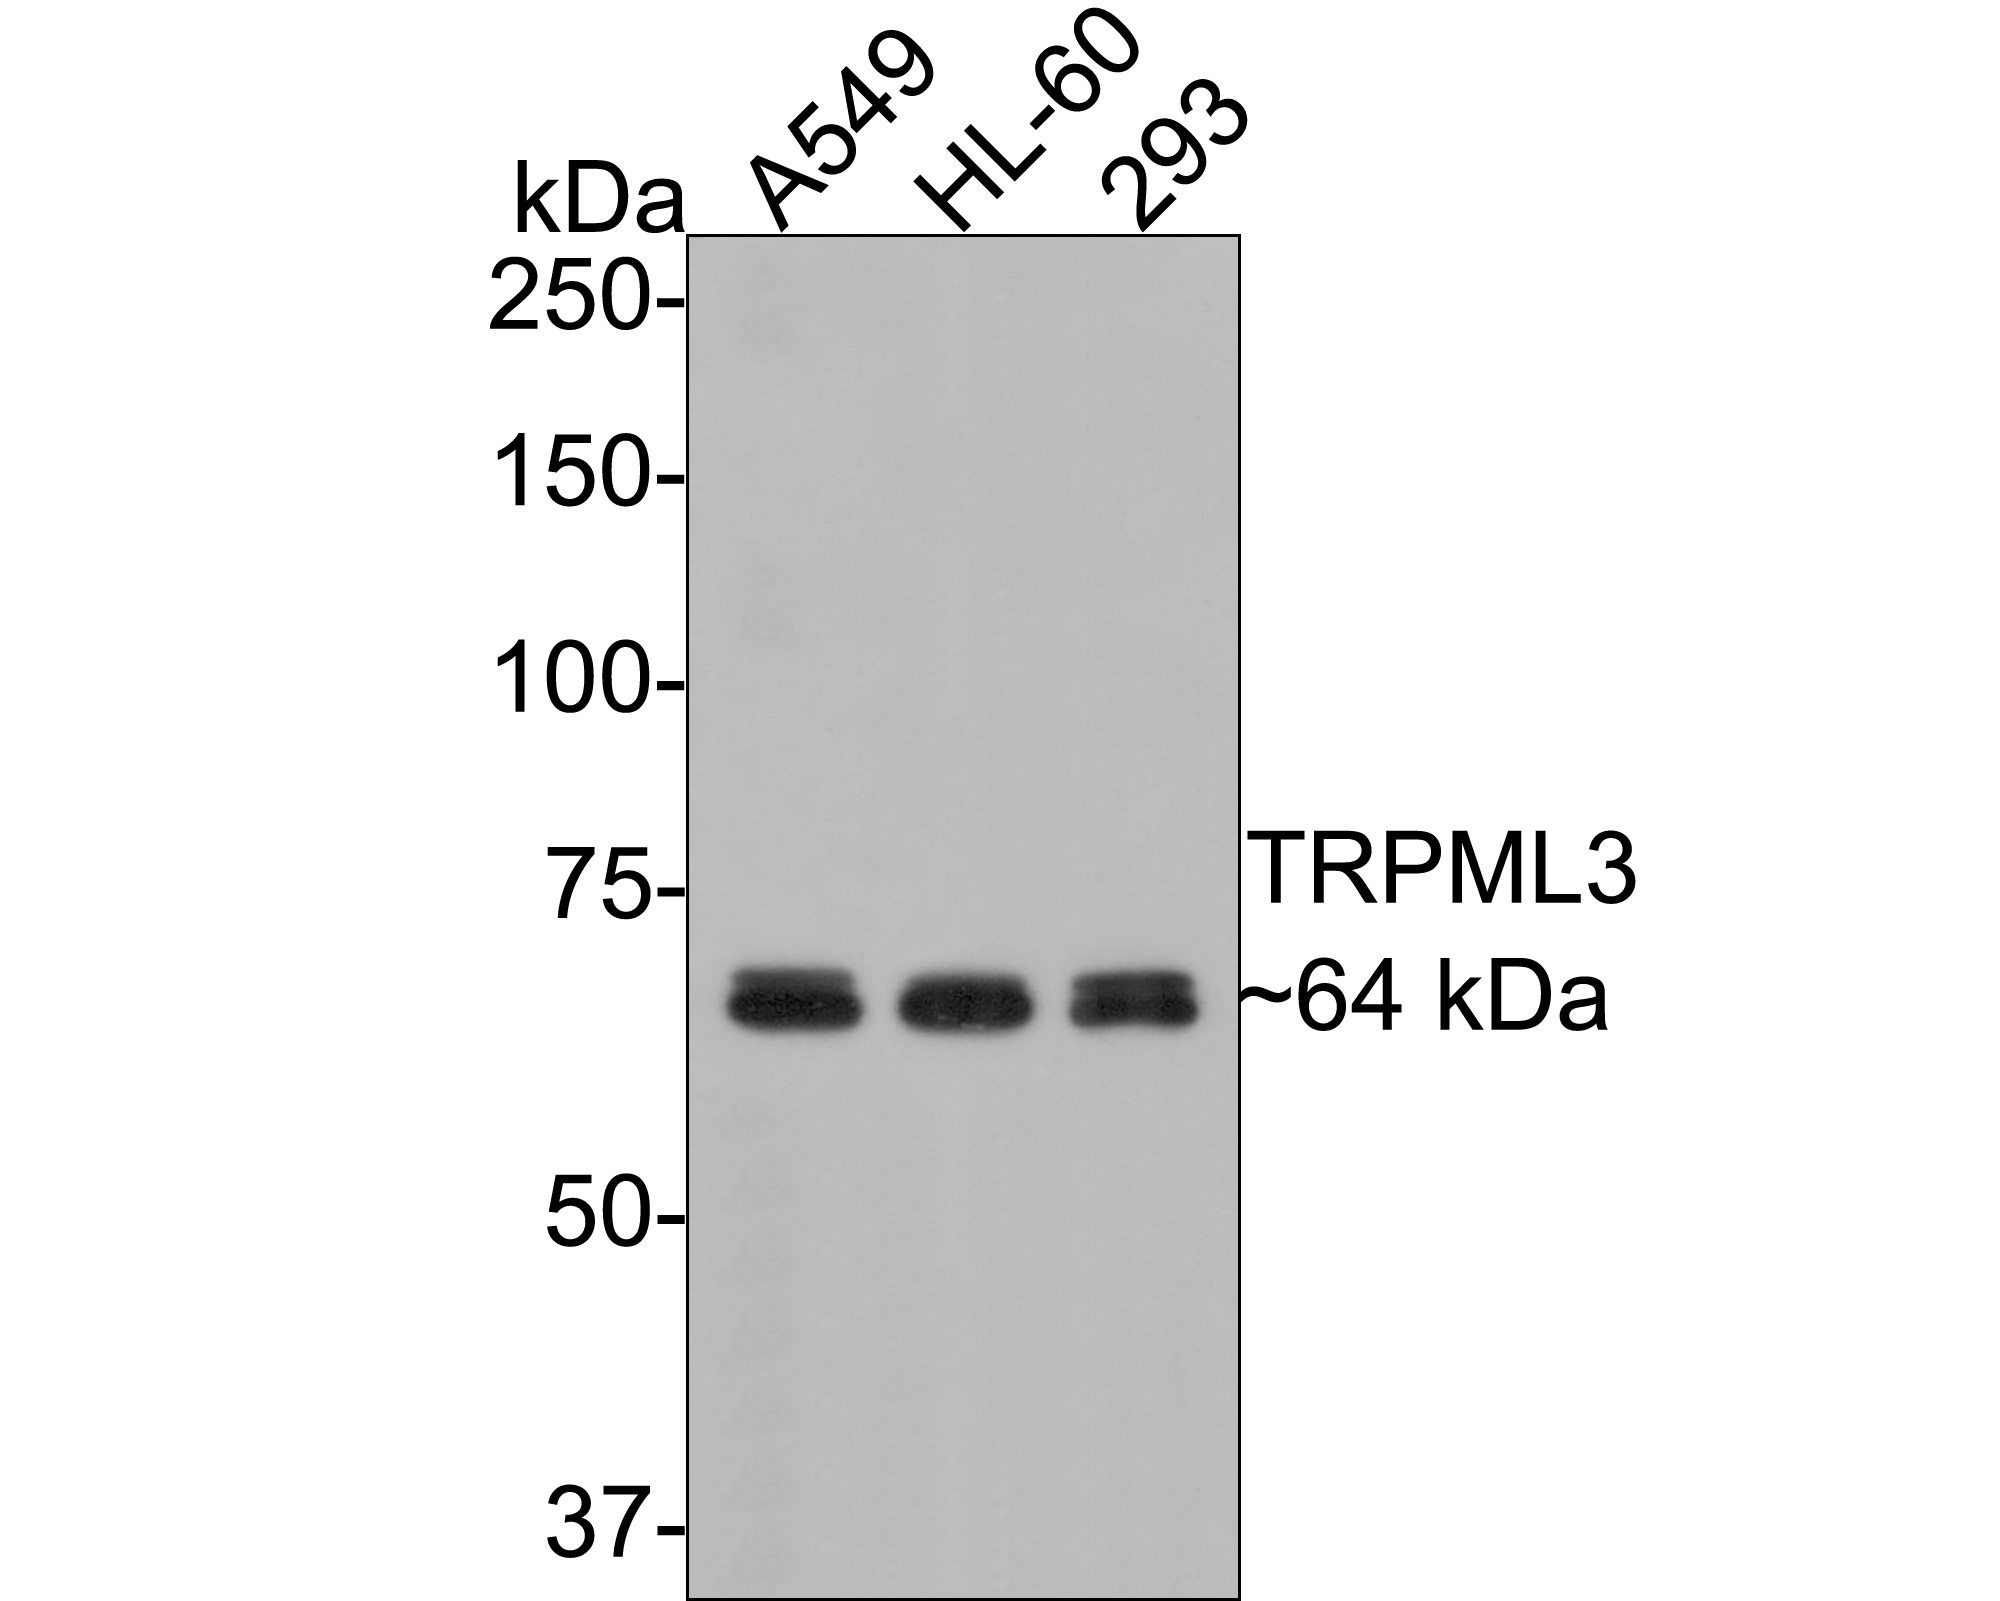 Western blot analysis of TRPML3 on different lysates with Rabbit anti-TRPML3 antibody (ER1901-21) at 1/2,000 dilution.<br />
<br />
Lane 1: A549 cell lysate<br />
Lane 2: HL-60 cell lysate<br />
Lane 3: 293 cell lysate<br />
<br />
Lysates/proteins at 10 µg/Lane.<br />
<br />
Predicted band size: 64 kDa<br />
Observed band size: 64 kDa<br />
<br />
Exposure time: 1 minute;<br />
<br />
8% SDS-PAGE gel.<br />
<br />
Proteins were transferred to a PVDF membrane and blocked with 5% NFDM/TBST for 1 hour at room temperature. The primary antibody (ER1901-21) at 1/2,000 dilution was used in 5% NFDM/TBST at room temperature for 2 hours. Goat Anti-Rabbit IgG - HRP Secondary Antibody (HA1001) at 1:300,000 dilution was used for 1 hour at room temperature.